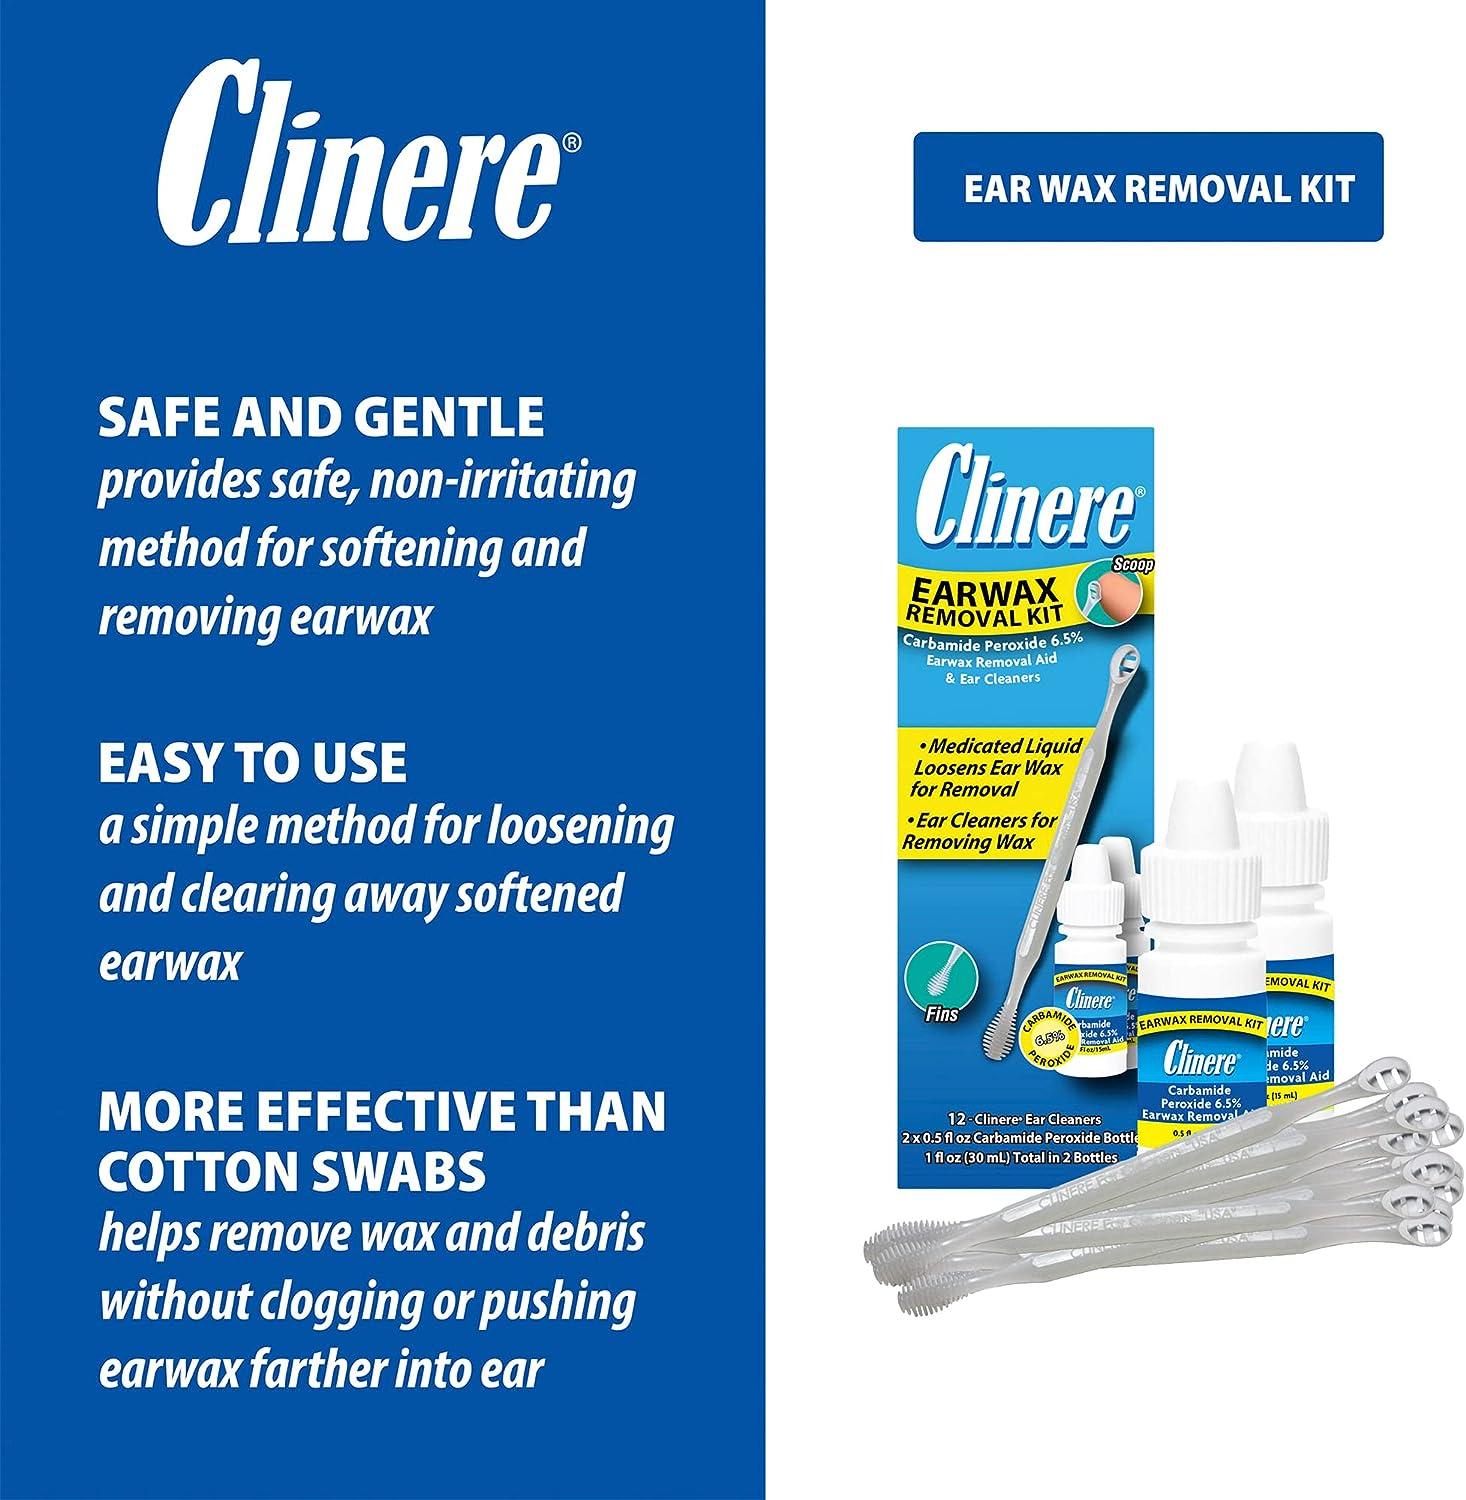 Clinere Ear Wax Cleaning Kit